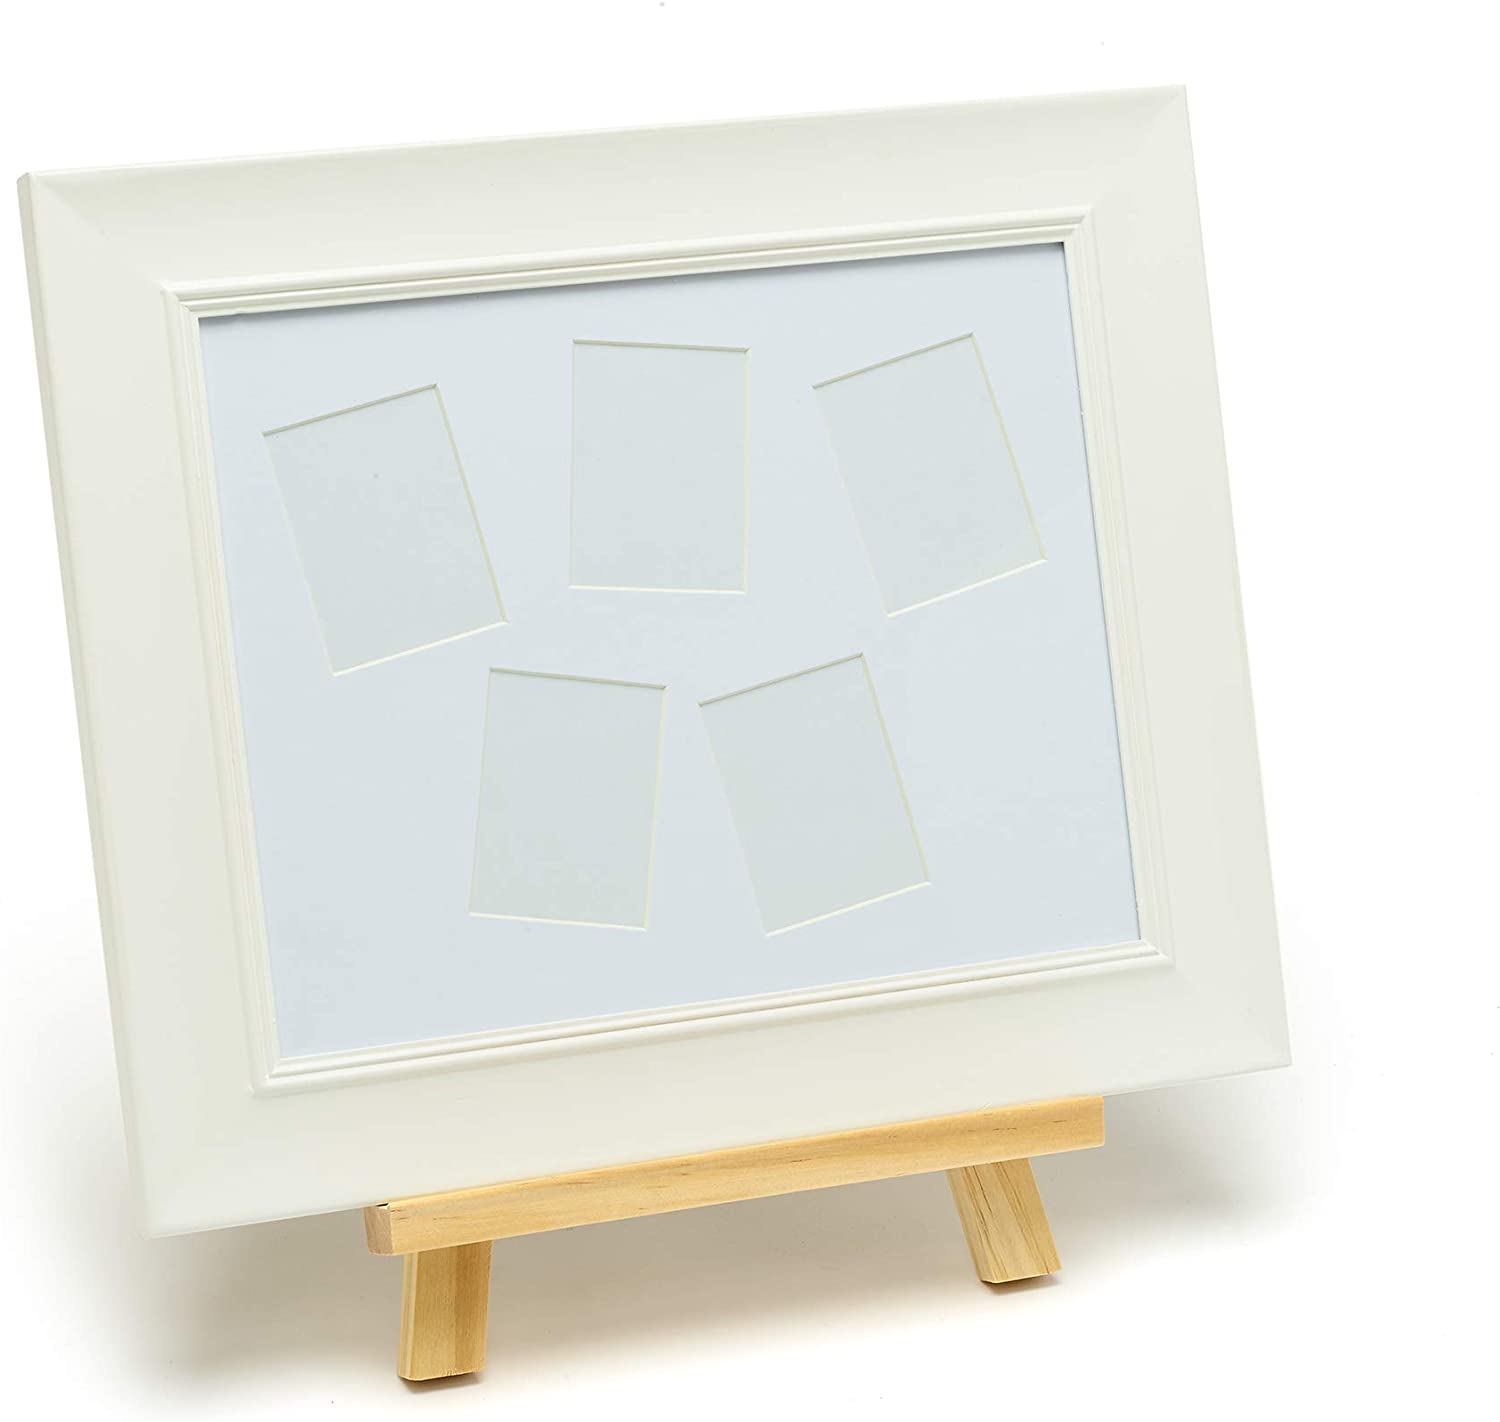 Product Image of Fujifilm Instax White Photo Frame & Easel